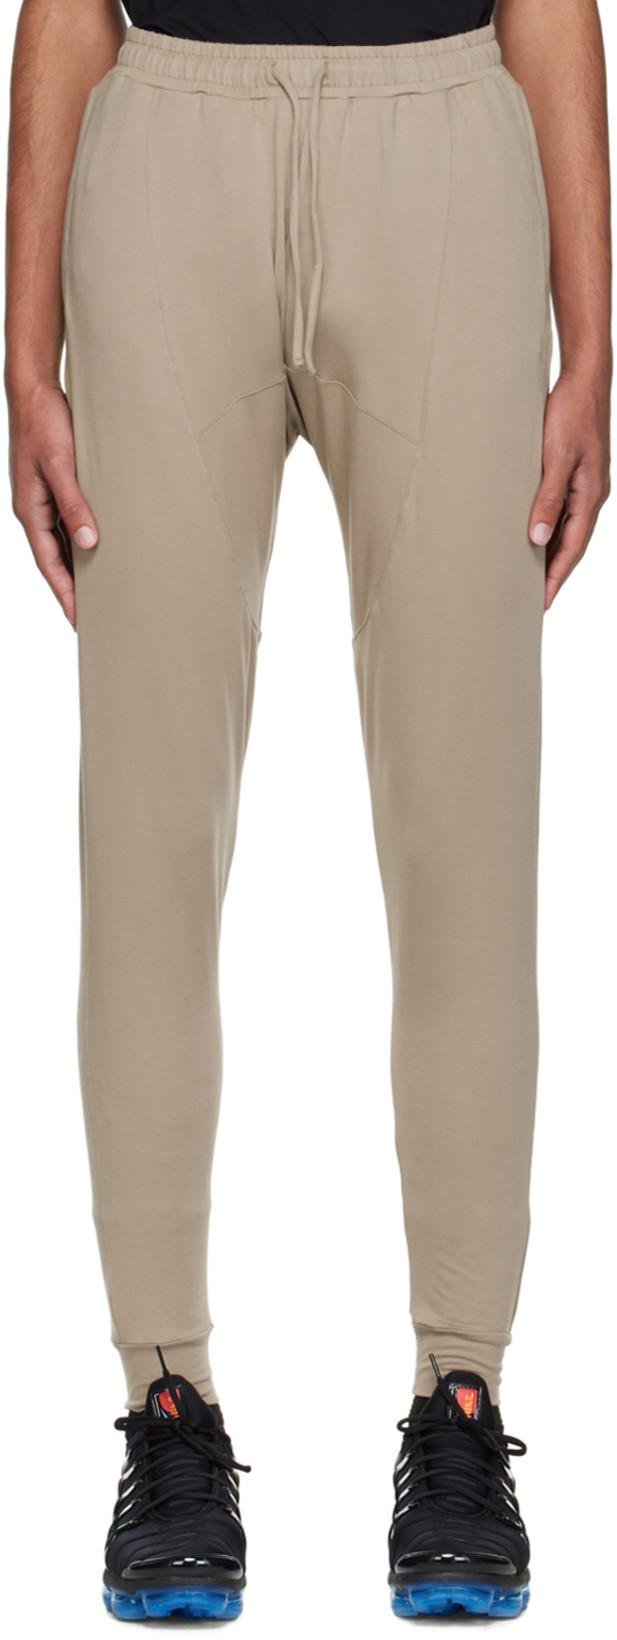 Beige Conquer Revitalize Lounge Pants by ALO